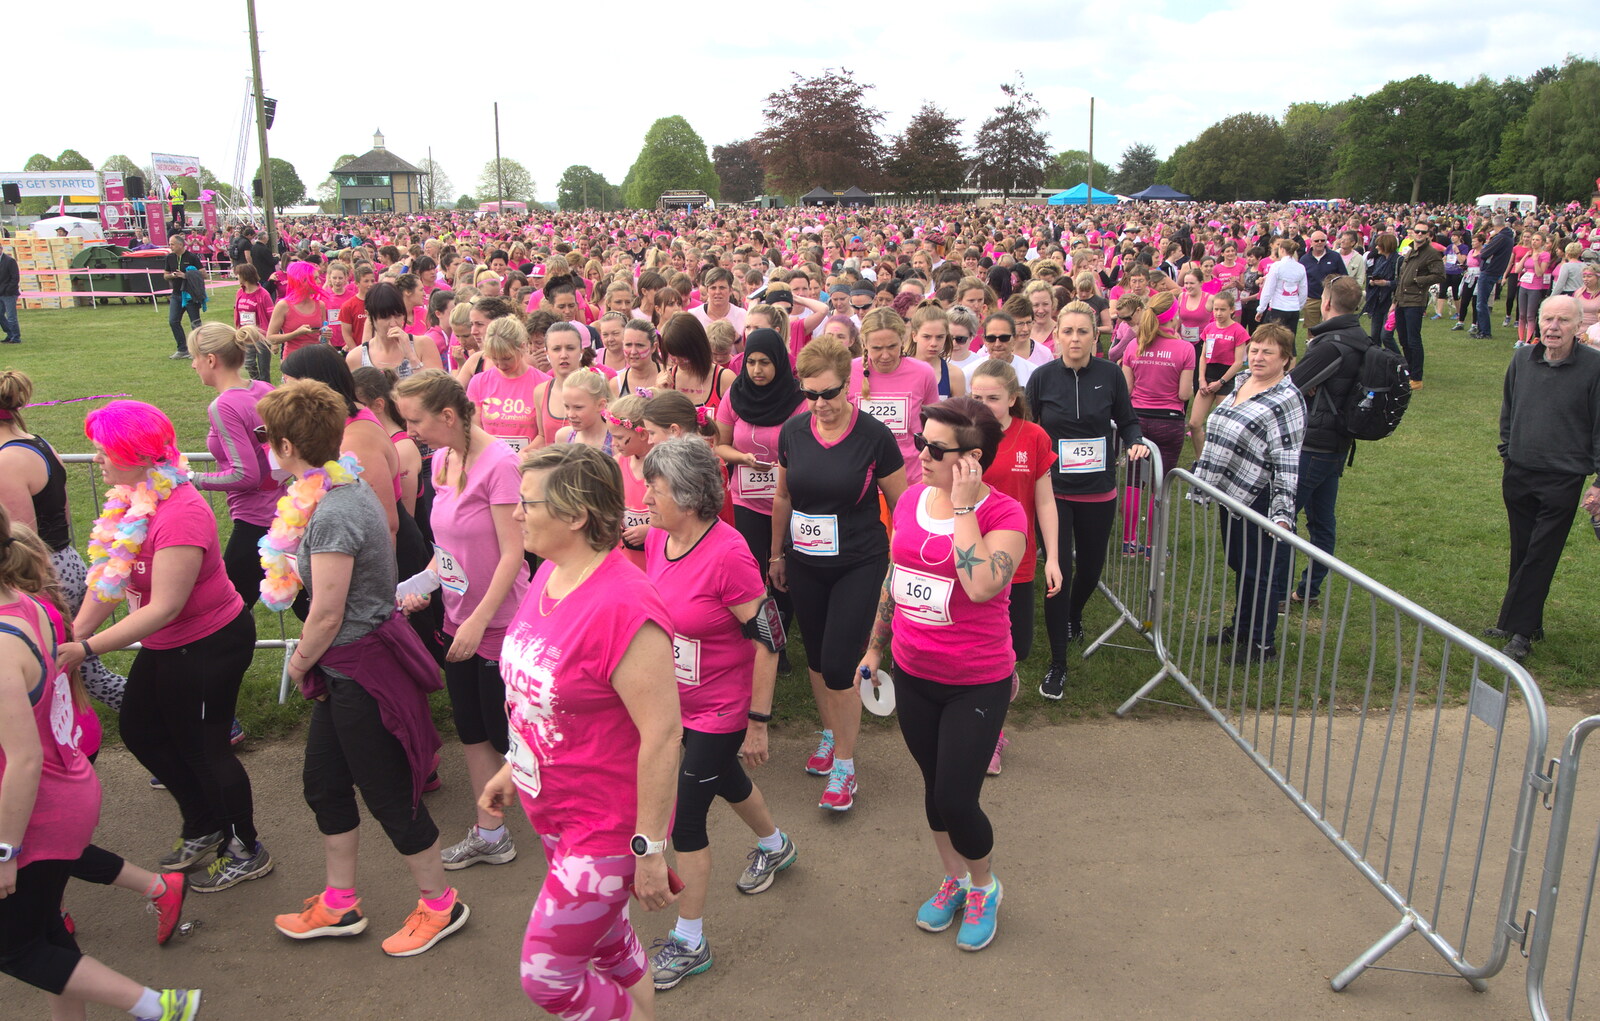 A mass of runners and walkers moves to the start from Isobel's Race for Life, Costessey, Norwich - 15th May 2016